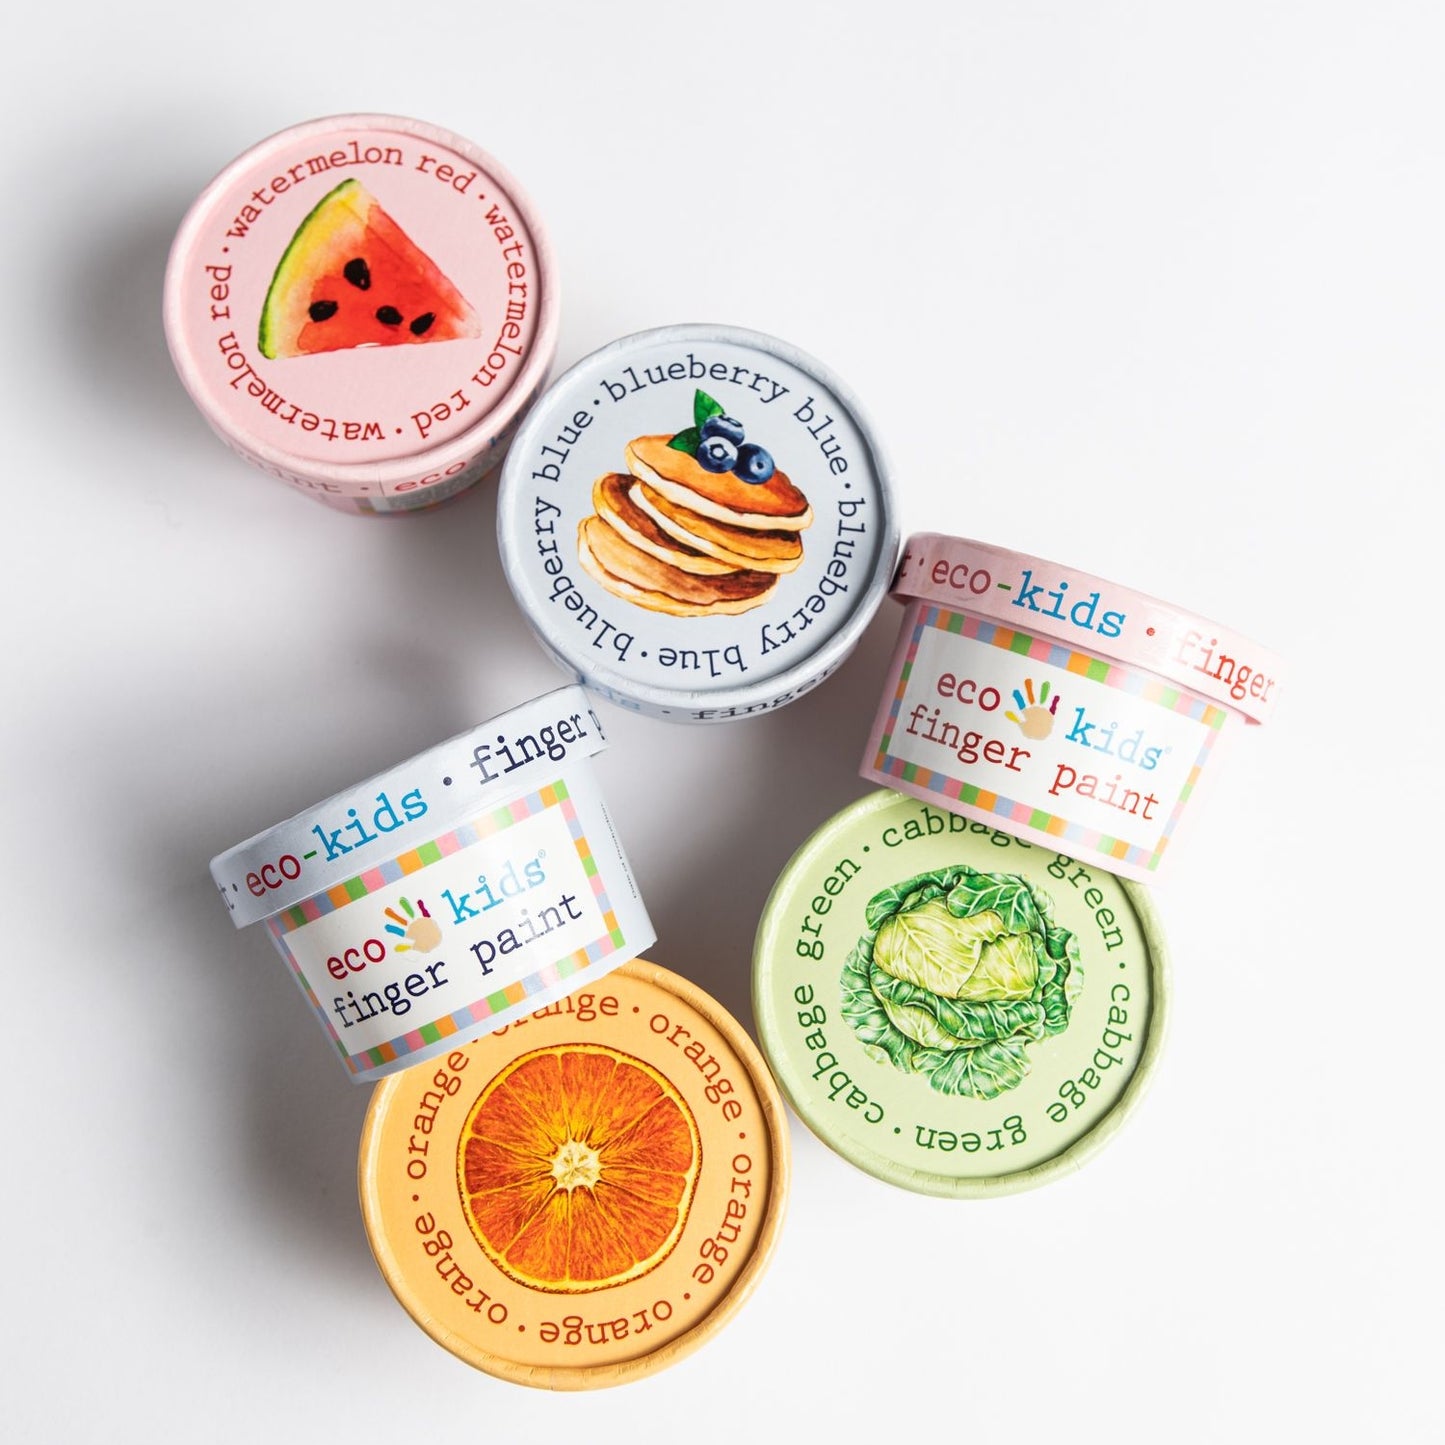 Food safe, all-natural finger paints for little artists. Our food safe, non GMO ingredients ( including potatoes, rice and beans) provide an all-natural, fun-filled and colorful adventure for the very youngest artist.